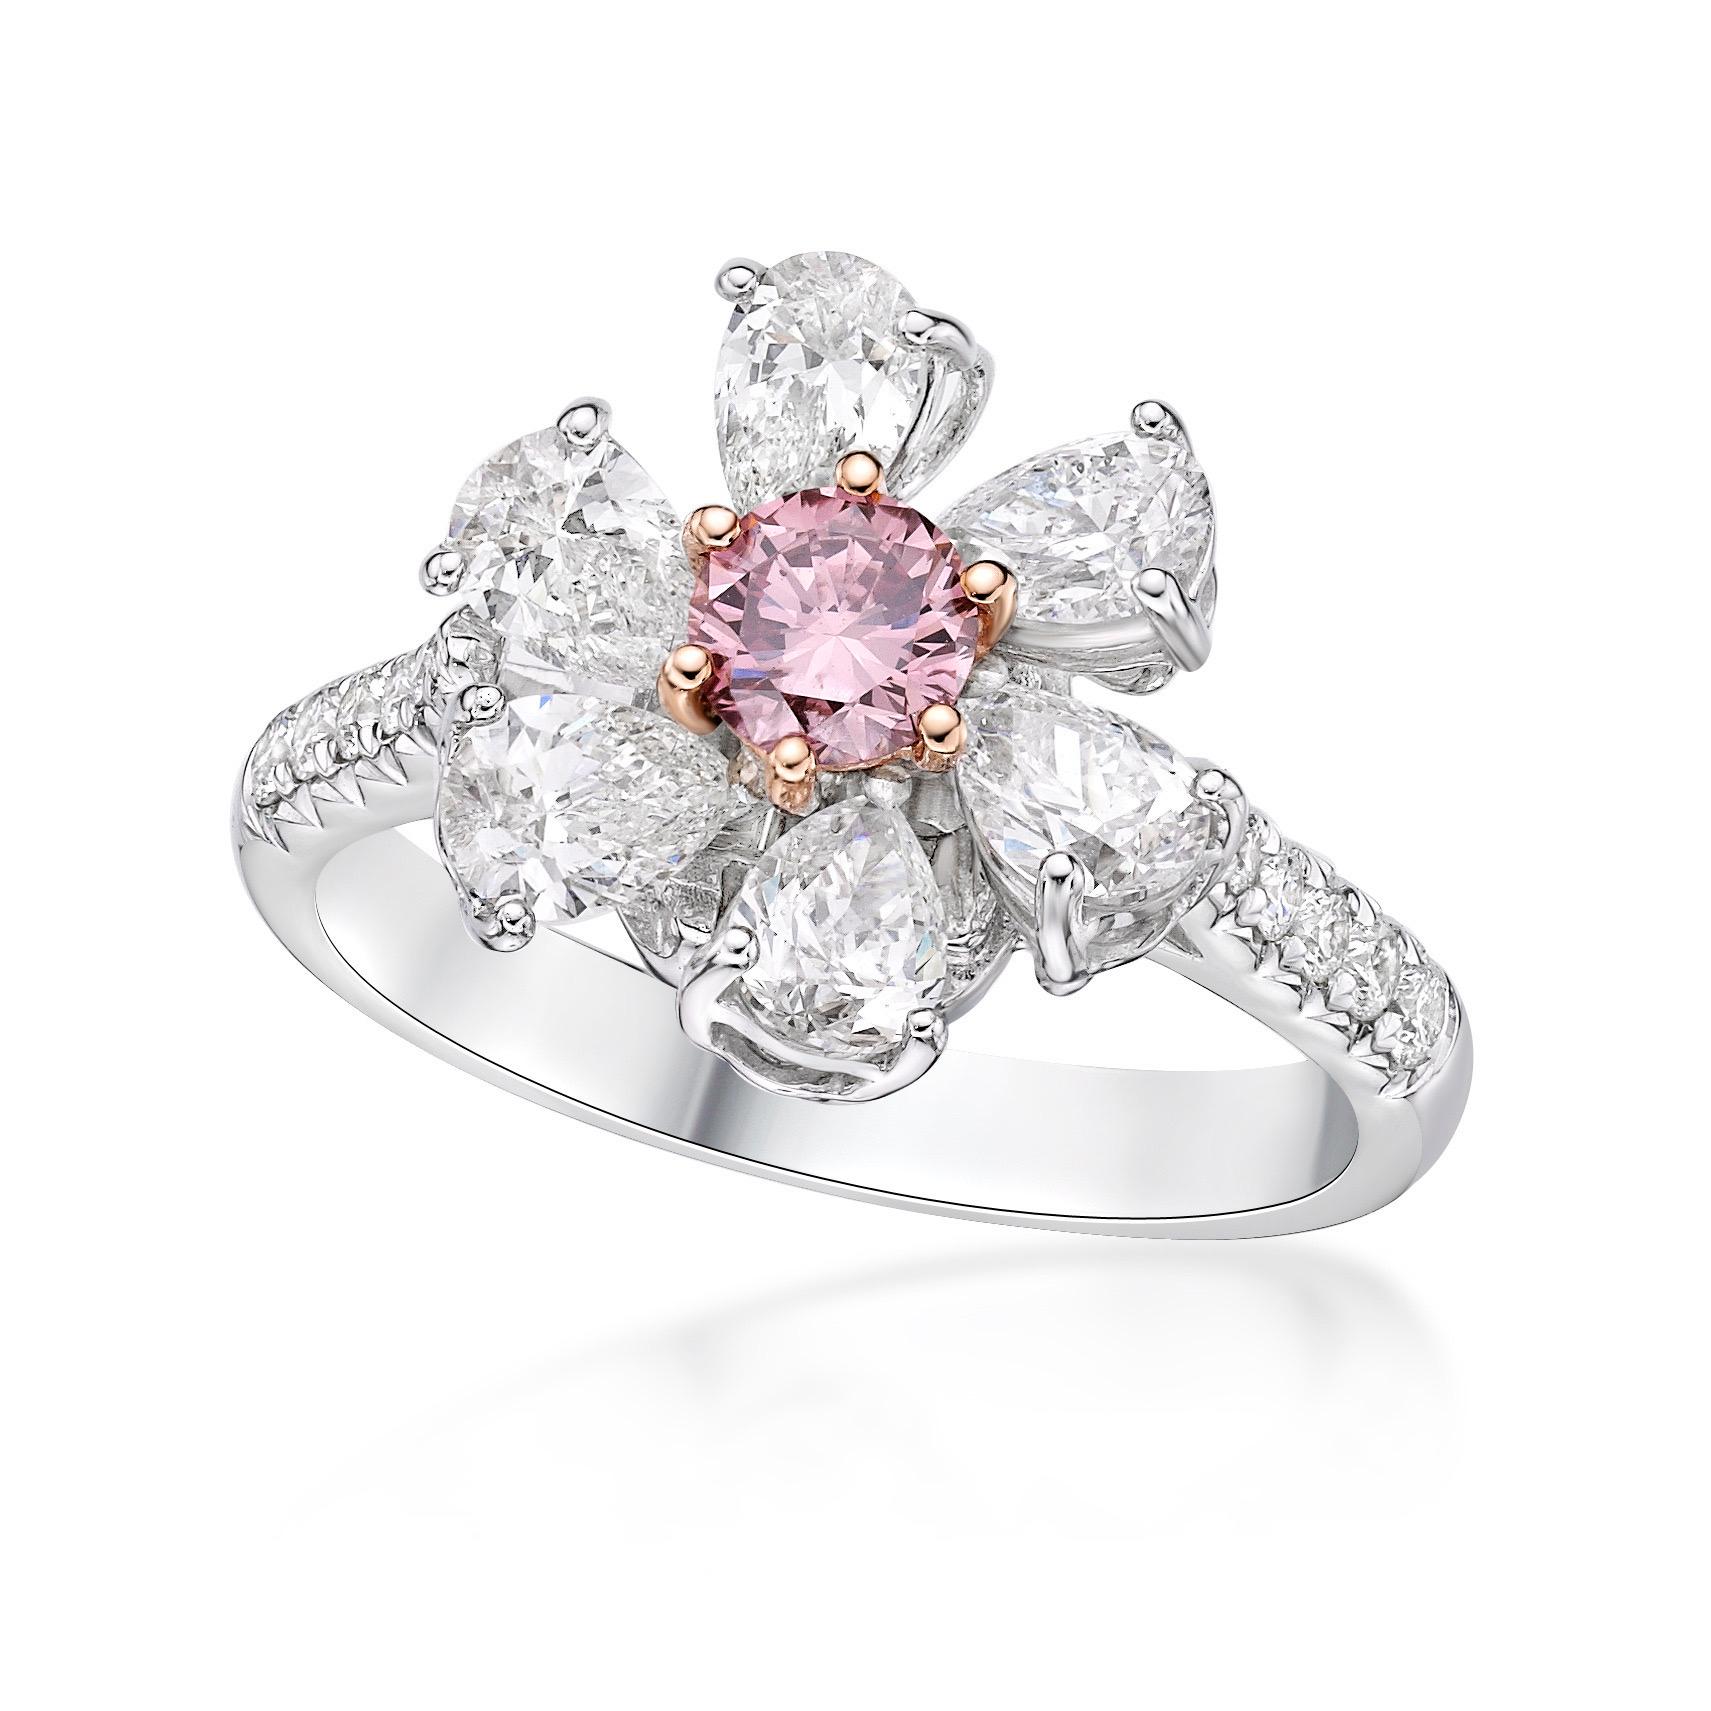 Emilio Jewelry Gia Certified 2.02 Carat Fancy Pink Diamond Ring  In New Condition For Sale In New York, NY